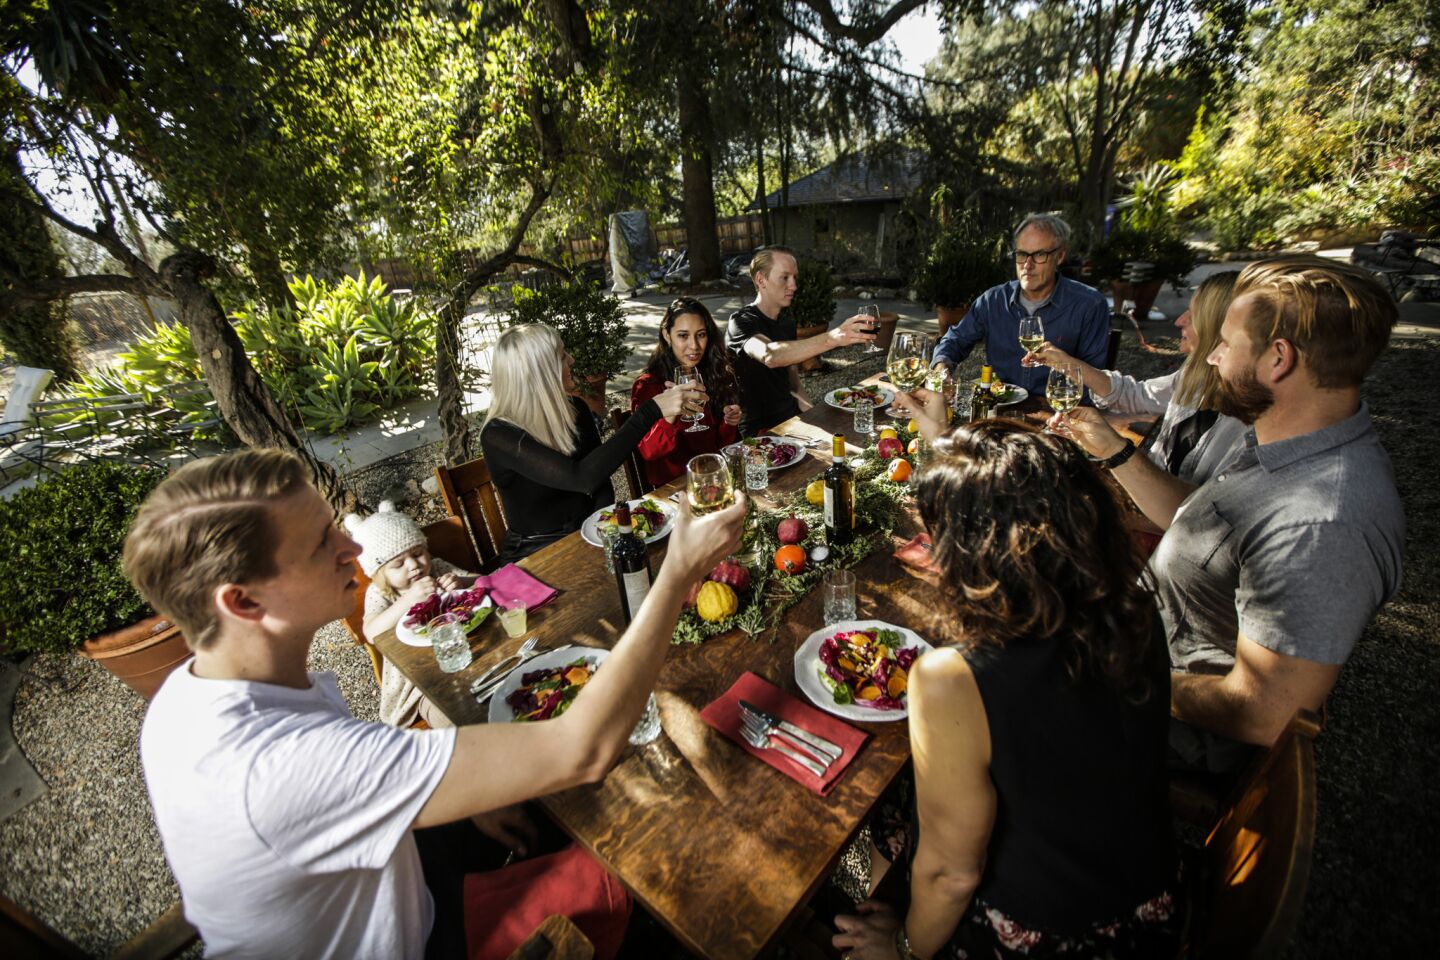 Andrea Crawford and her family partake in the holiday meal prepared at her home. The courses included rosemary steak skewers, radicchio salad, greens-stuffed flatbreads, kabocha squash and Meyer lemon tart.